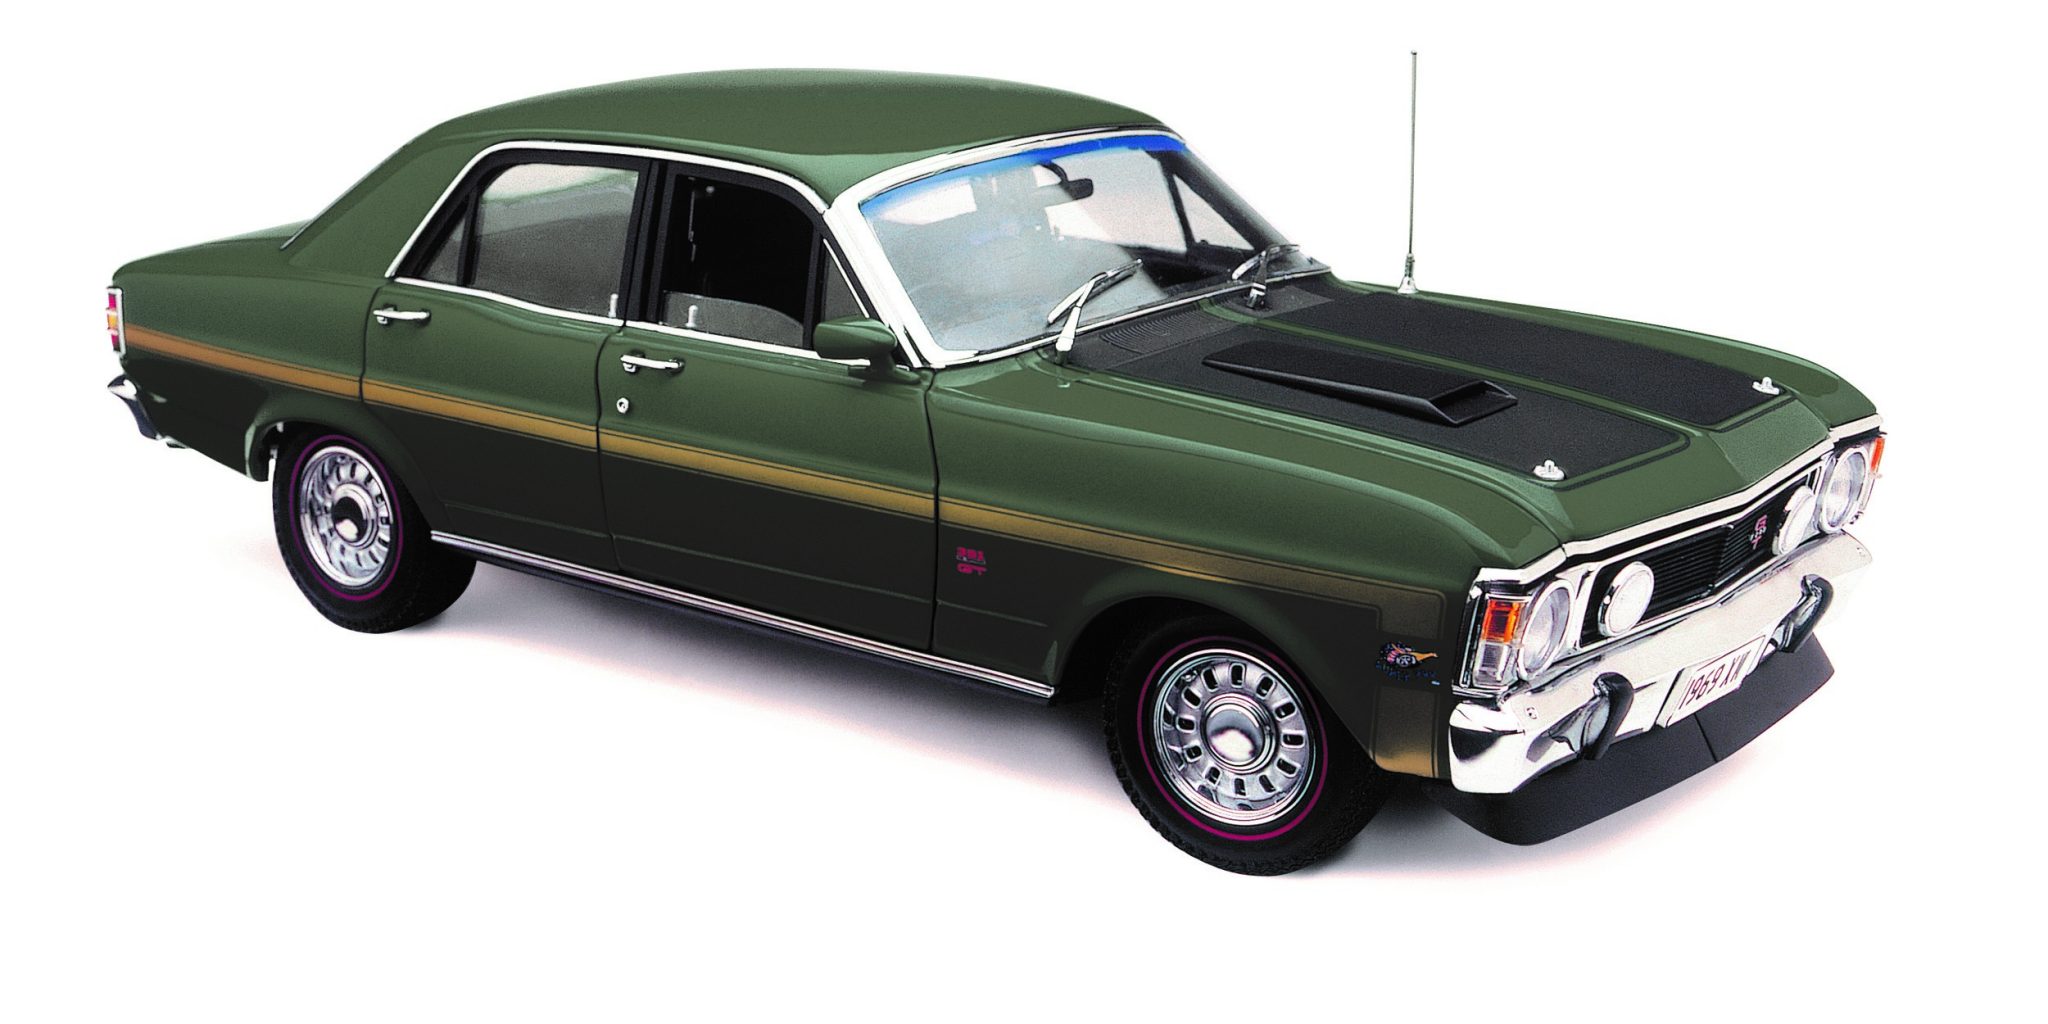 PRE ORDER - Ford XW Falcon GT-HO Phase II Reef Green Diecast 1:18 Scale Model Car (FULL PRICE - $279.00)